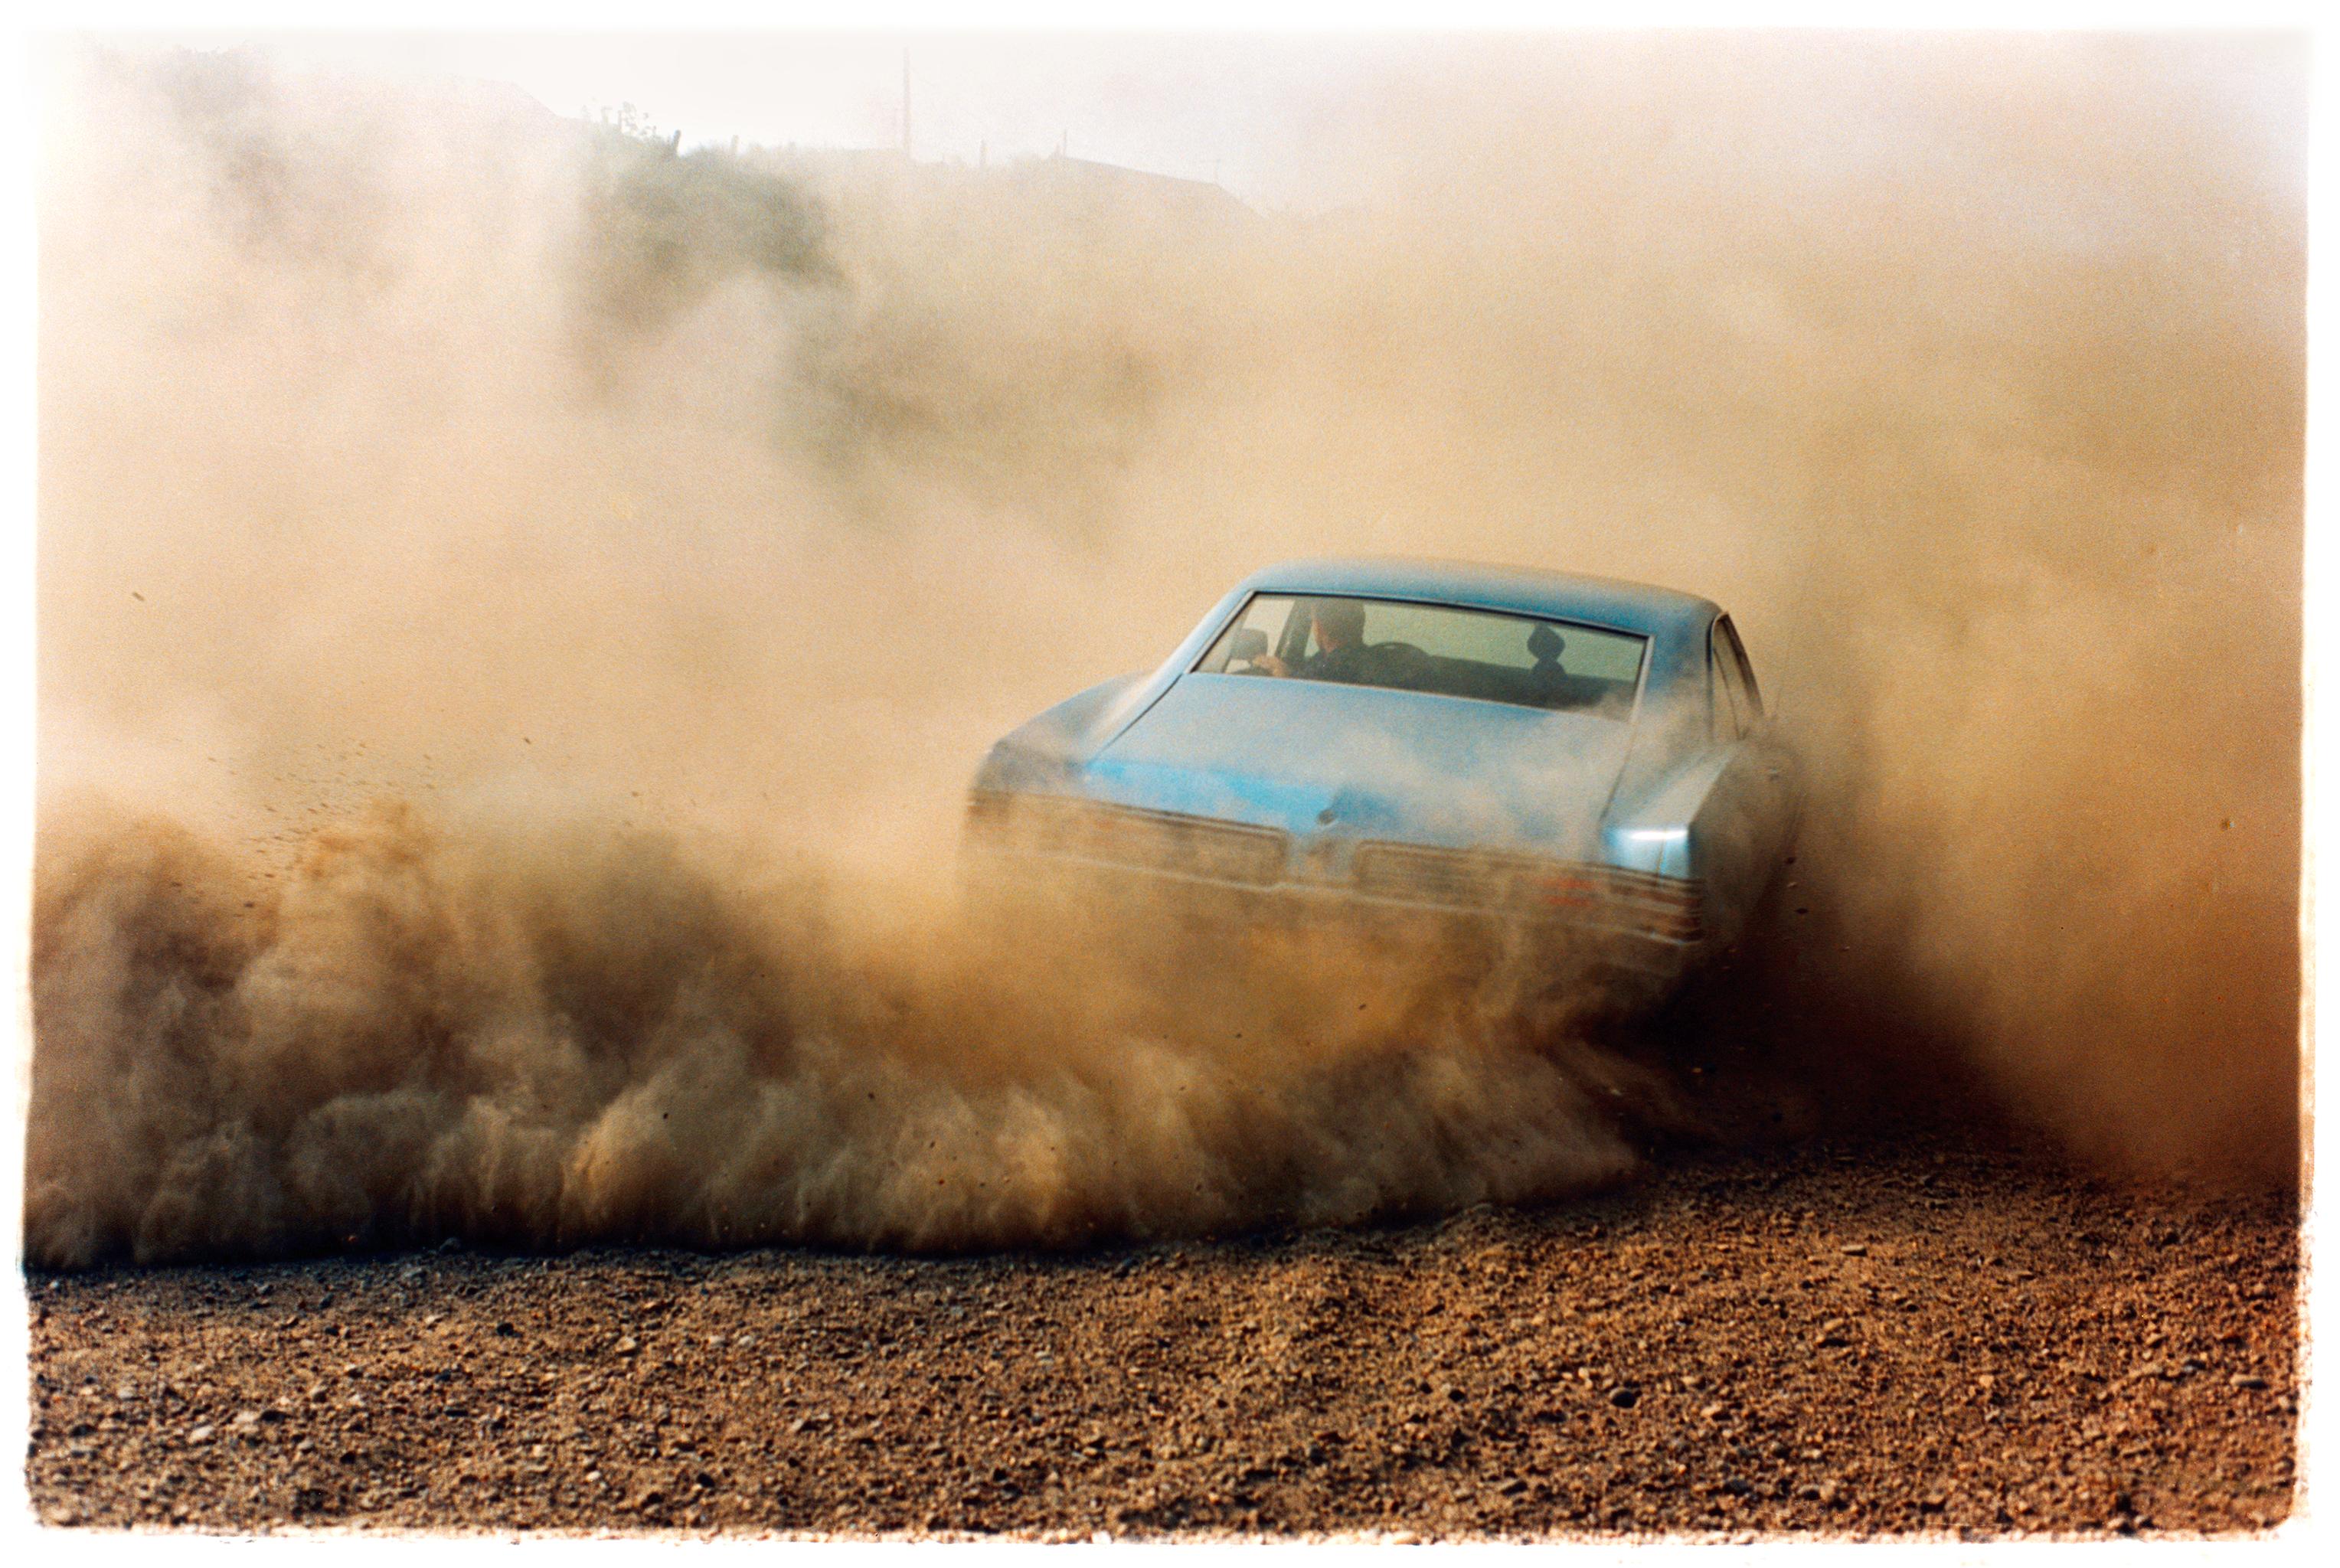 Buick in the Dust, Hemsby, Norfolk - Set of Four Framed Car Photographs For Sale 1